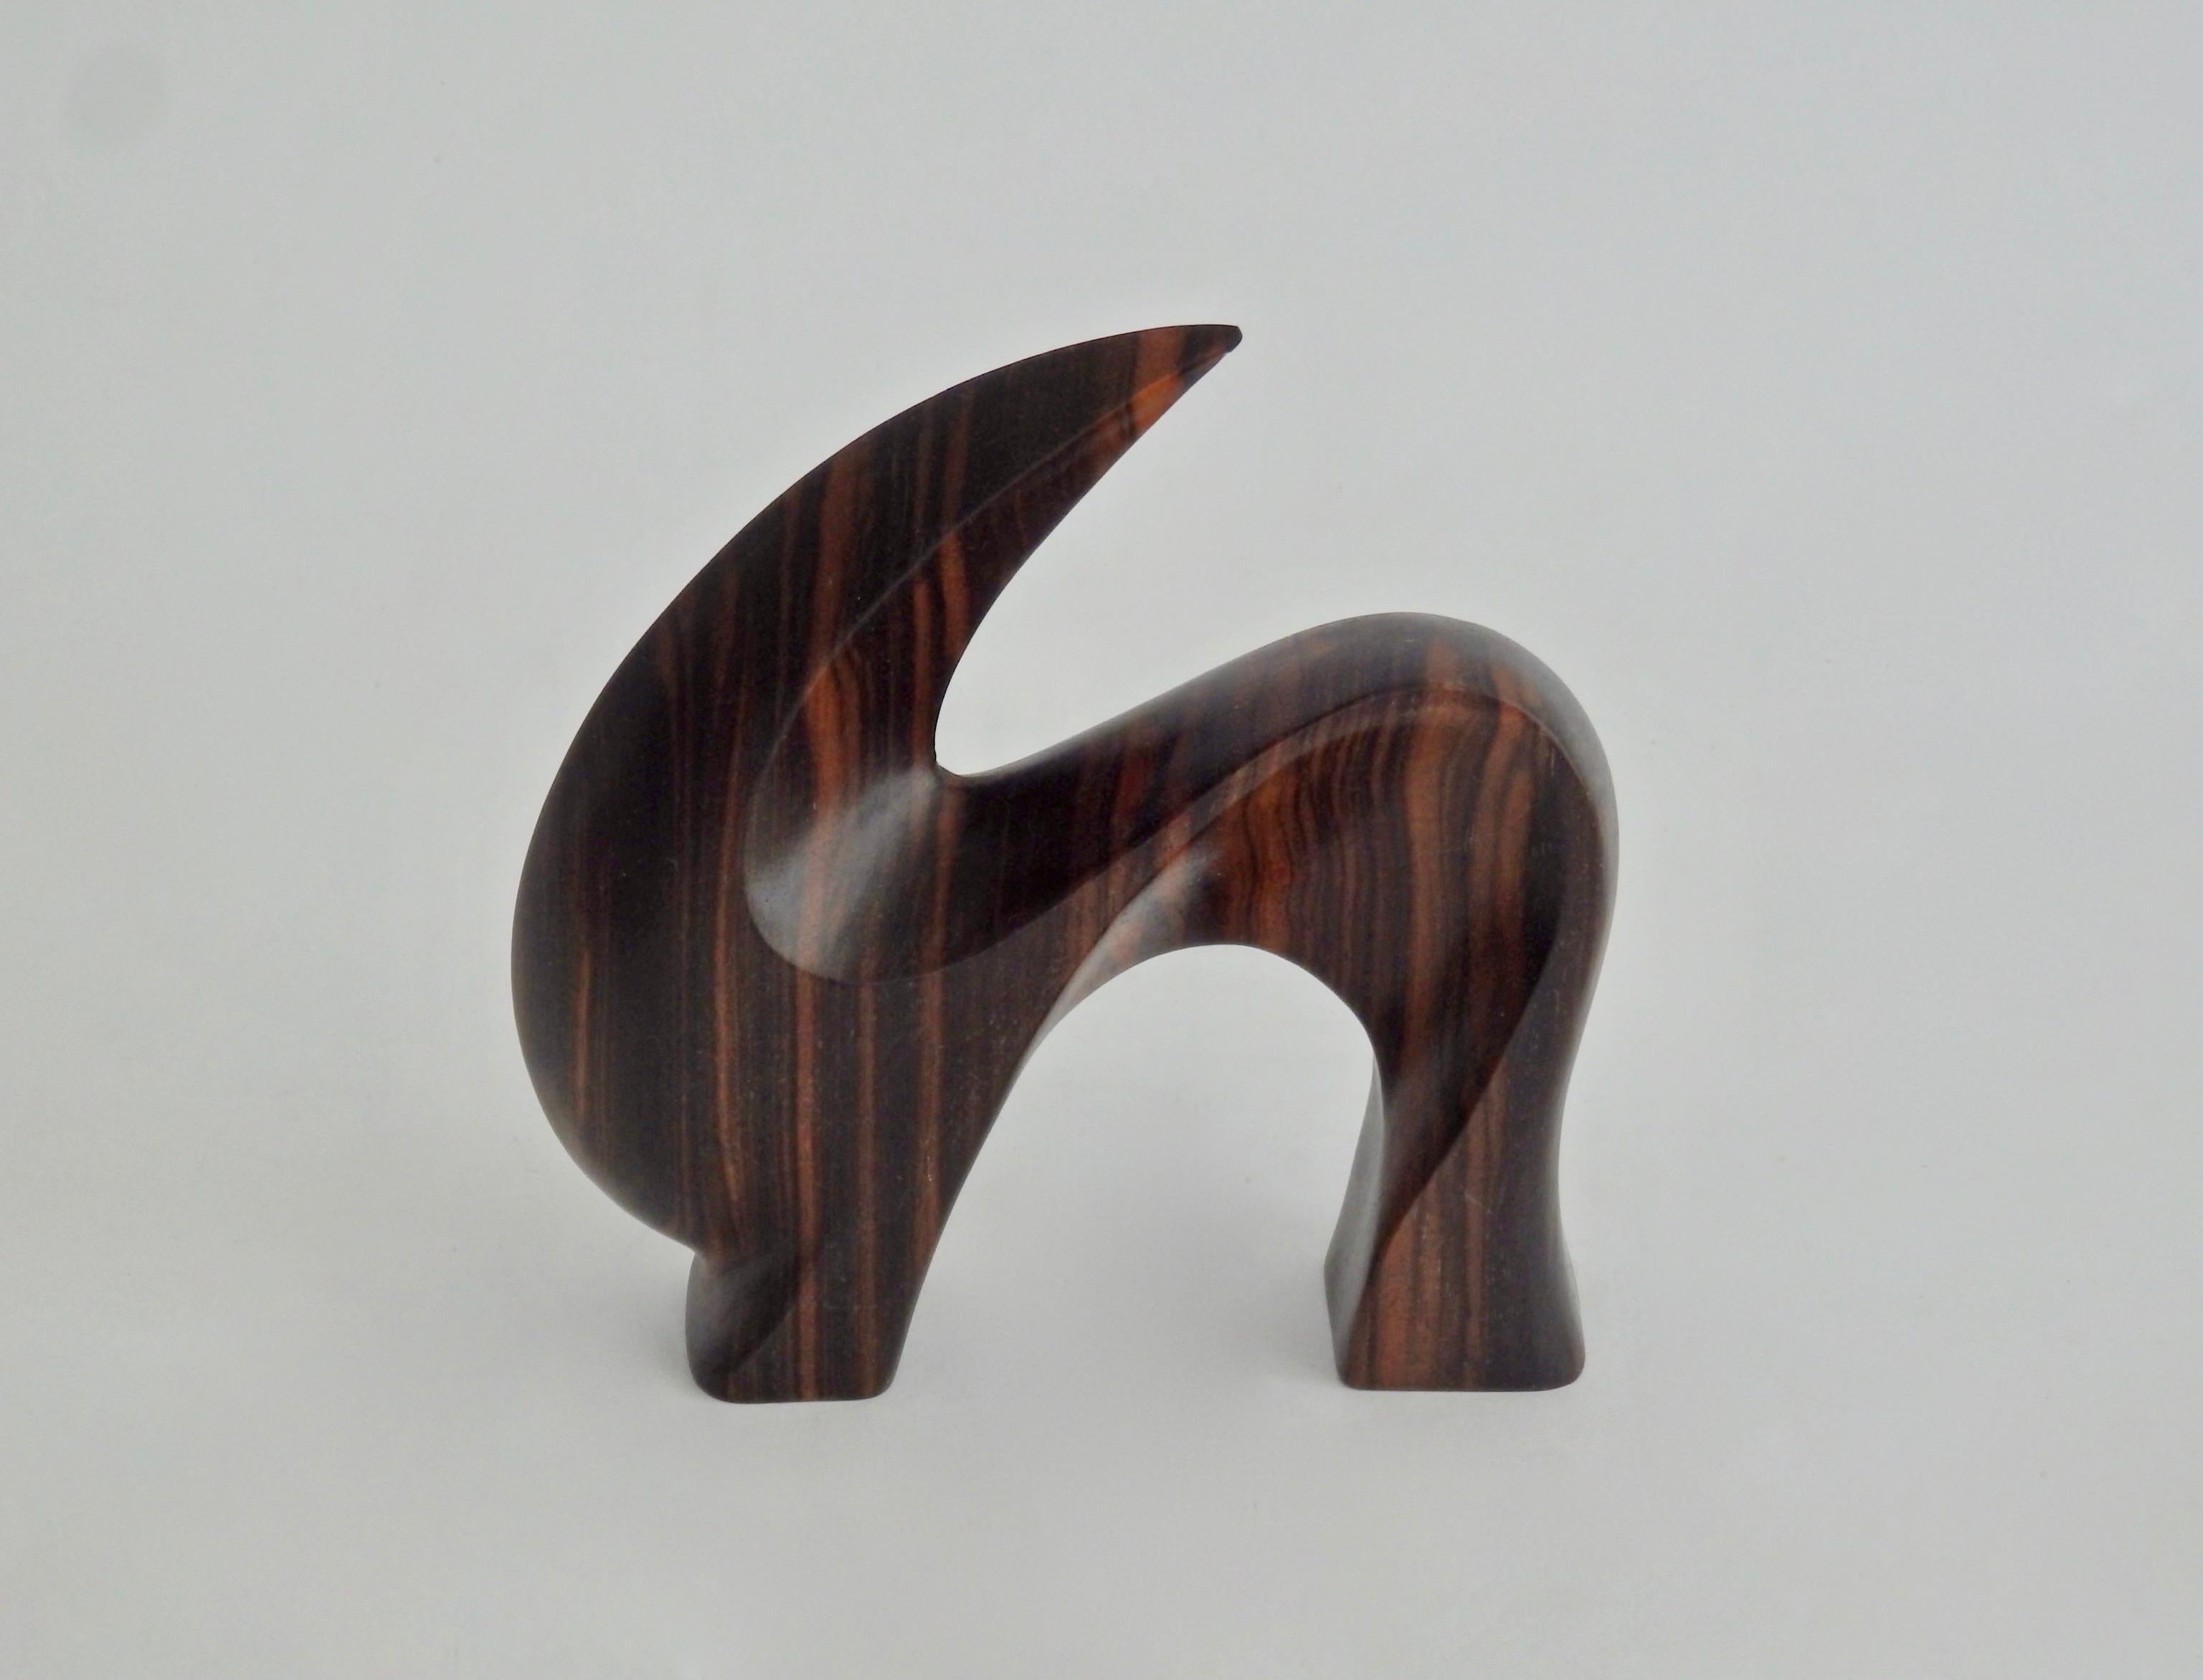 An aesthetically charming antelope sculpture in rich grainy rosewood. Both effortless and valiant despite its diminutive size.
Measures: 5.13